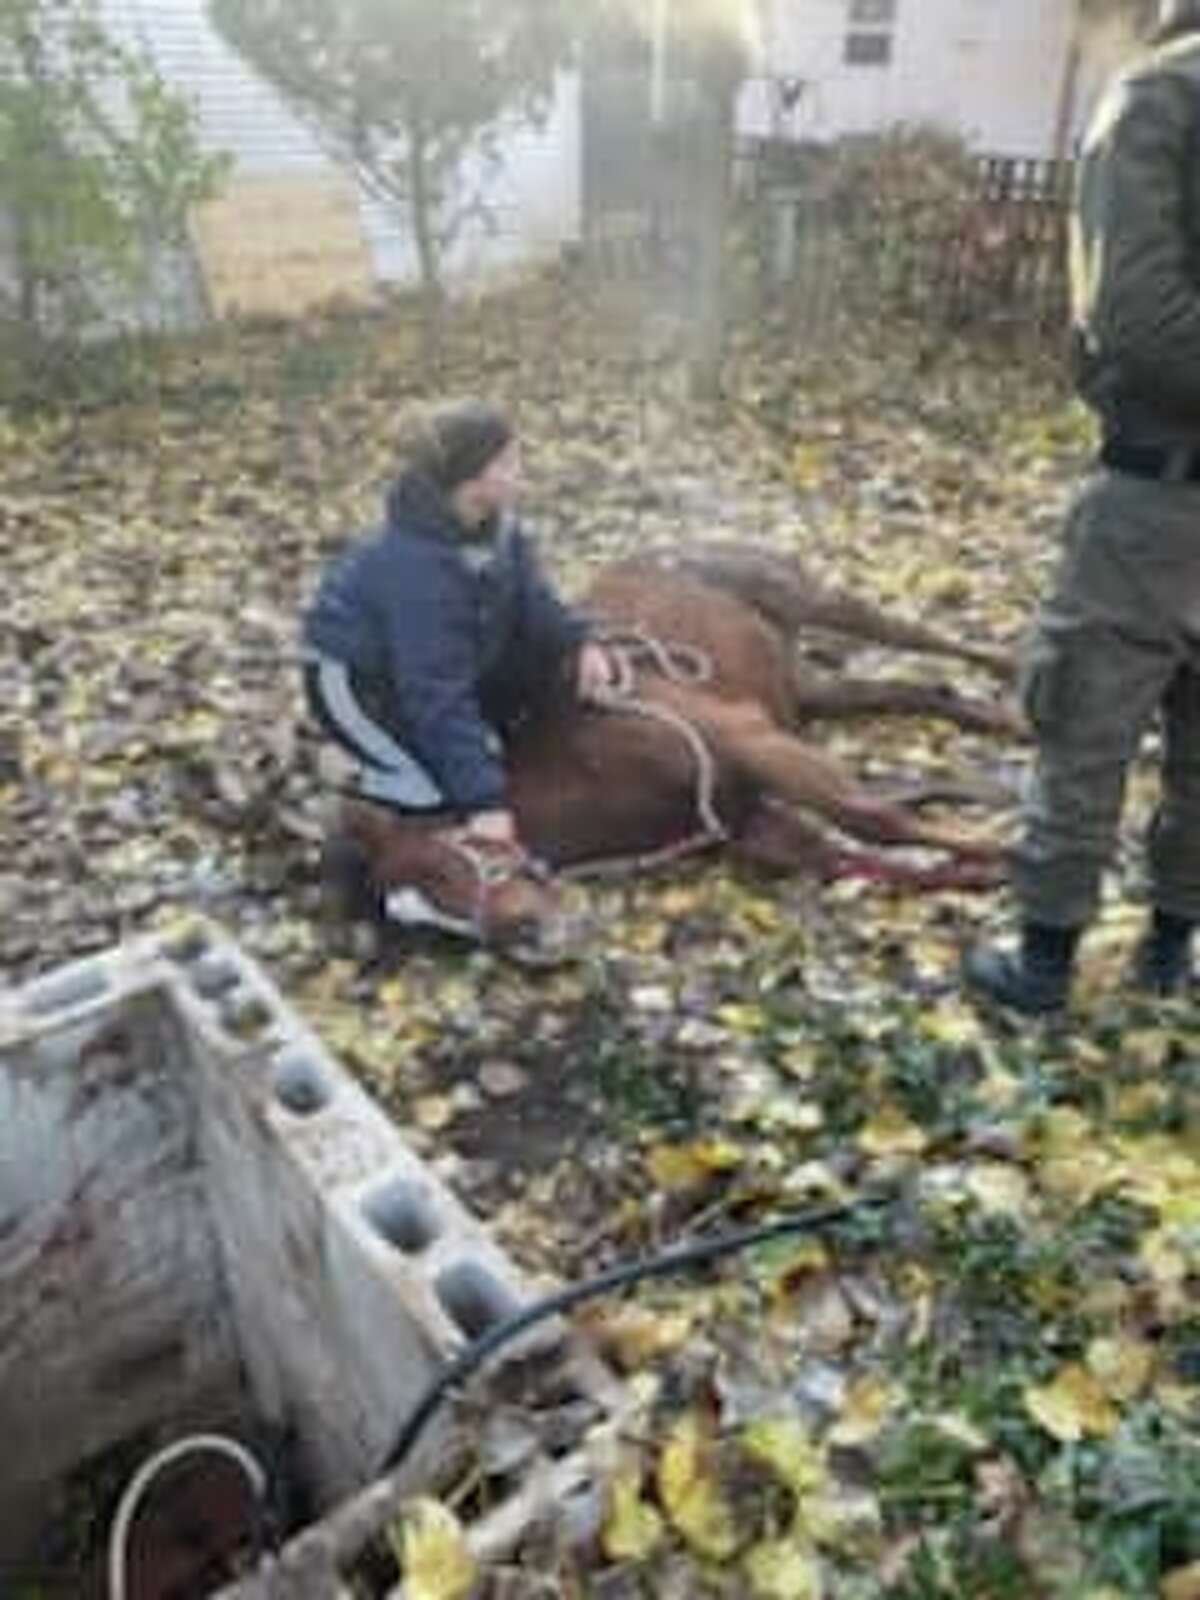 A veterinarian checks out a horse on Oct. 27 in Manistee County after it was rescued from a well pit.